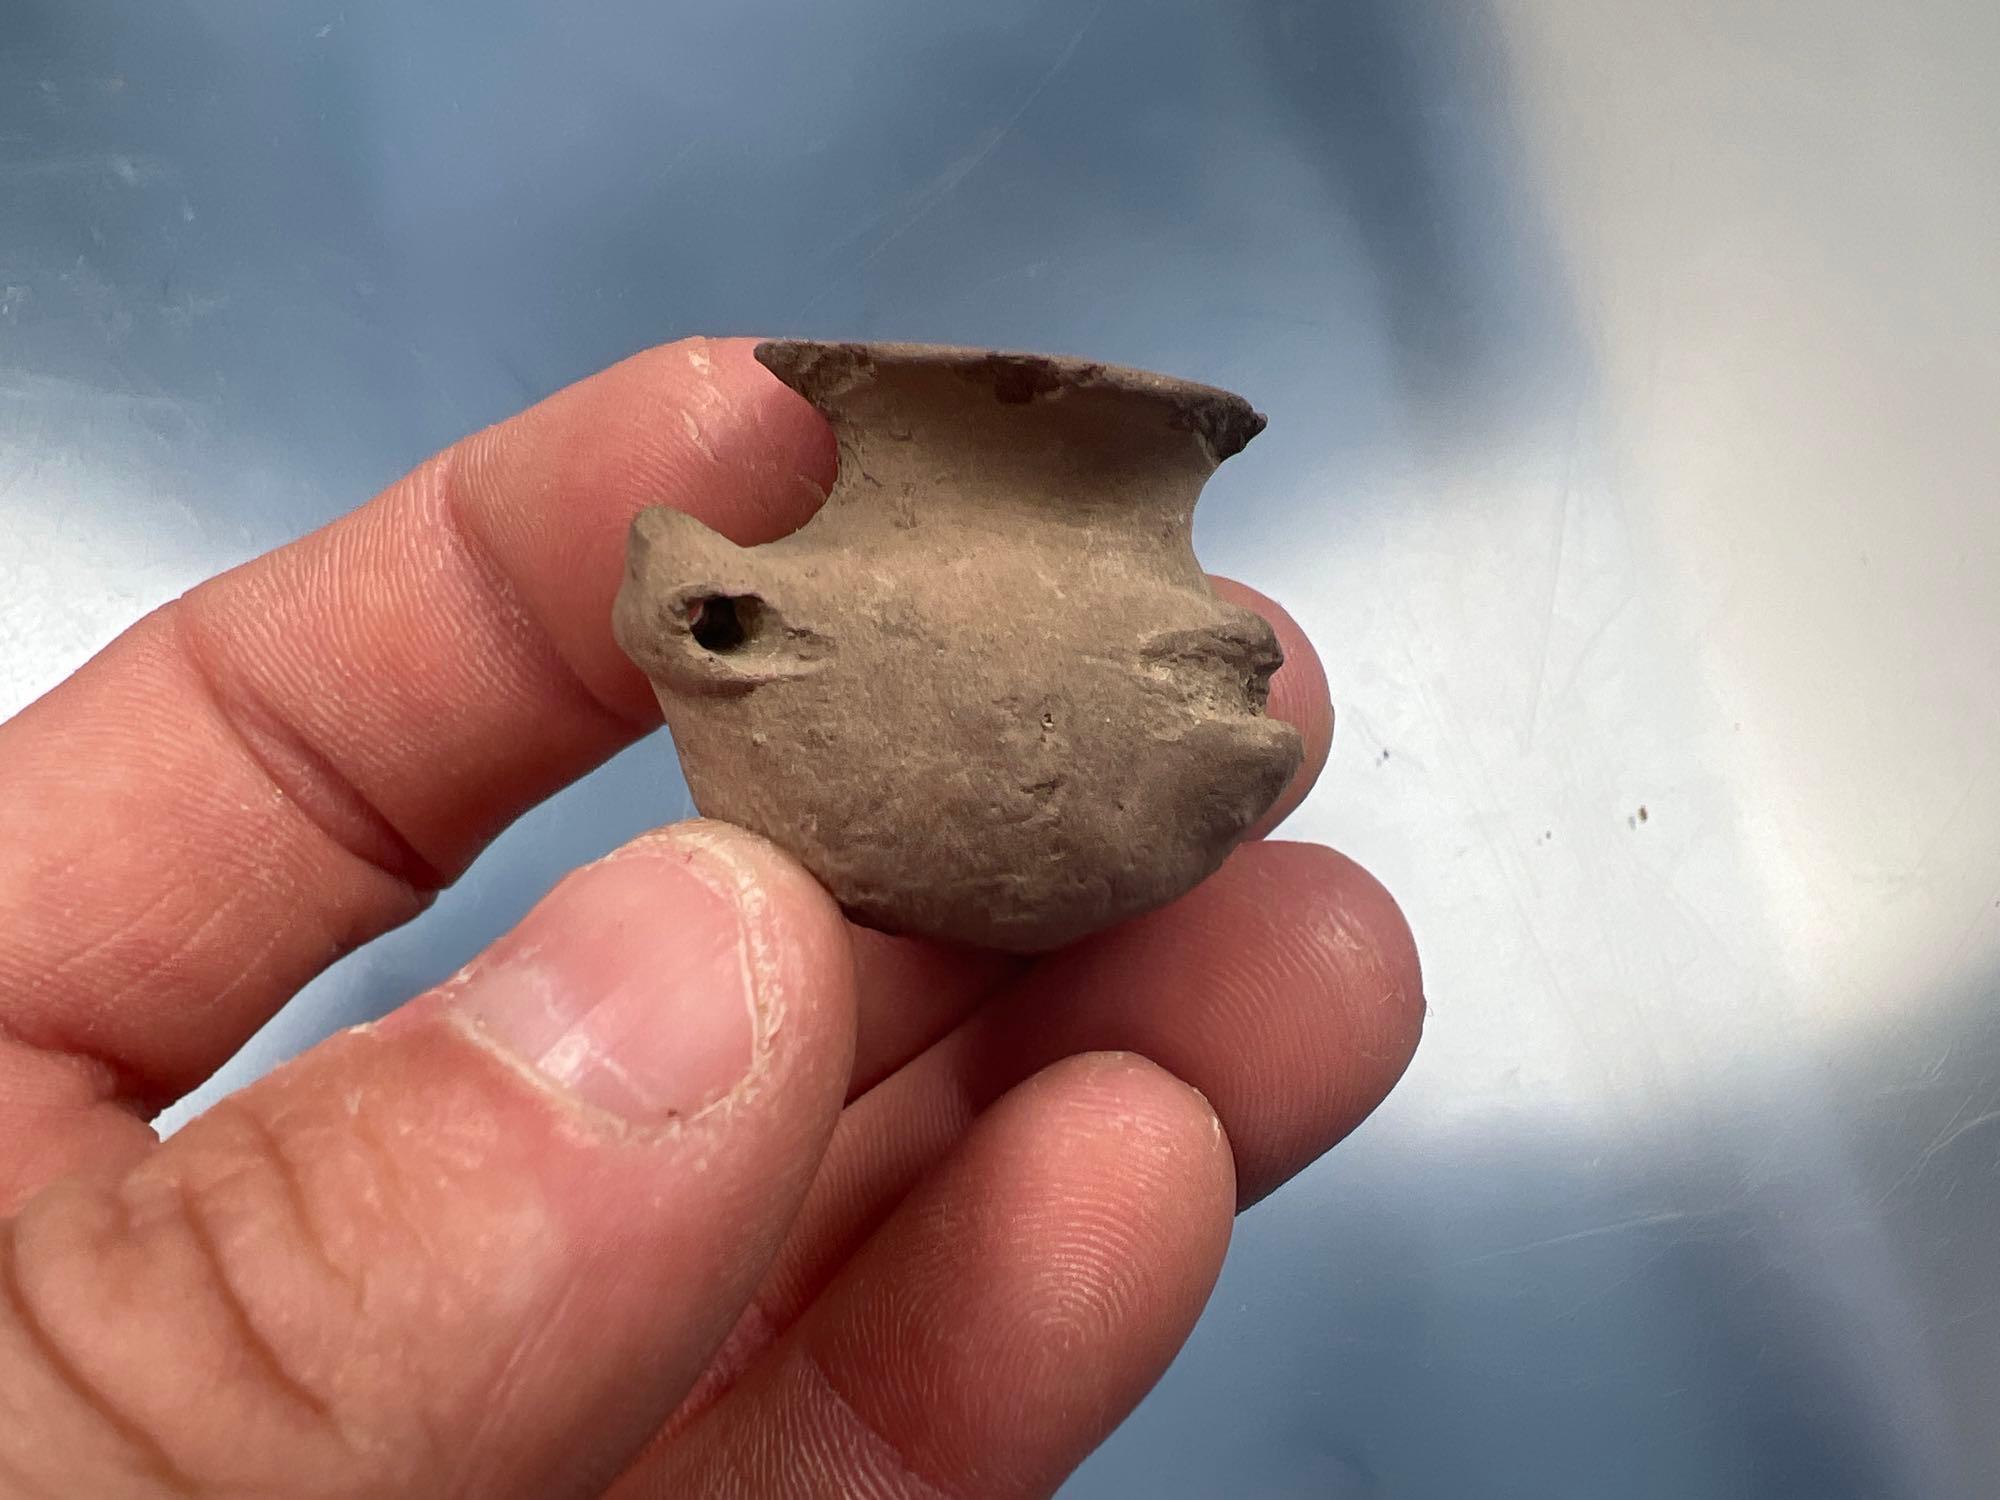 RARE Toy Clay Pottery Vessel, Mississippian Culture, Missouri, Suspension holes, 1 1/8" tall x 1 1/4